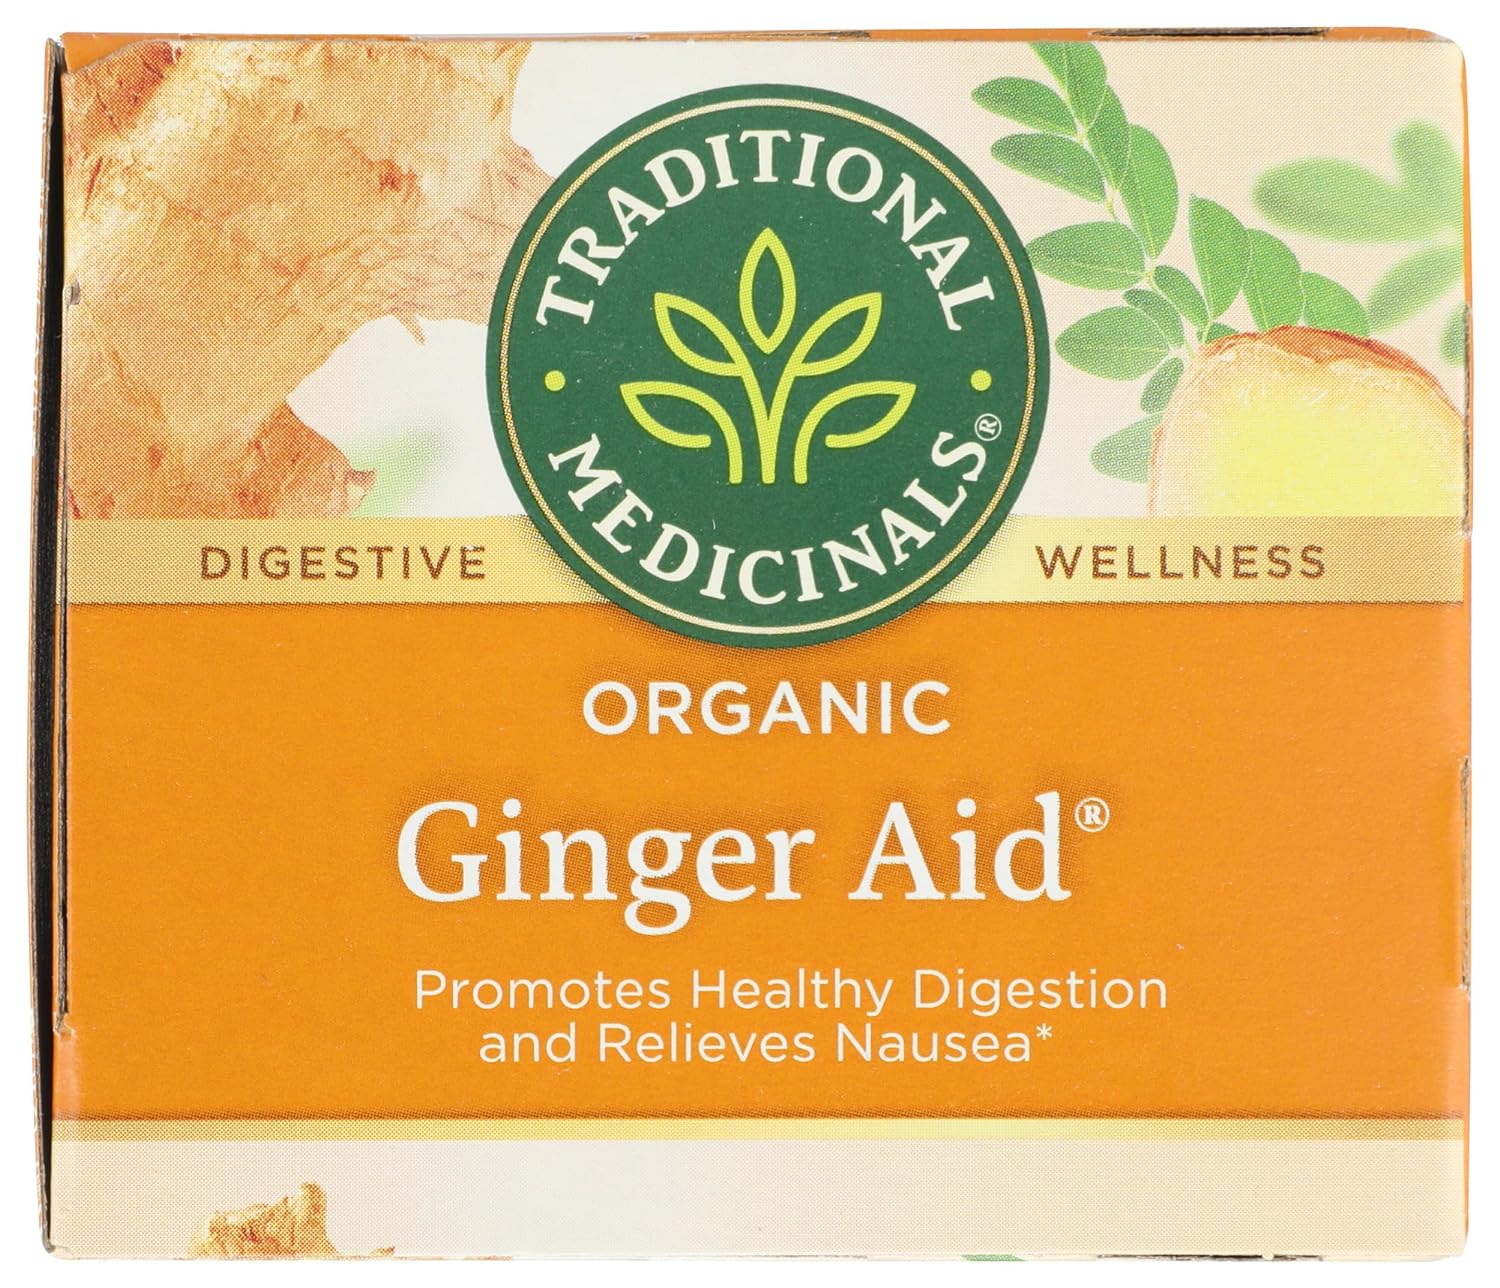 Traditional Medicinals Organic Ginger Aid Herbal Tea, Promotes Healthy Digestion, (Pack of 1) - 16 Tea Bags : Black Teas : Grocery & Gourmet Food